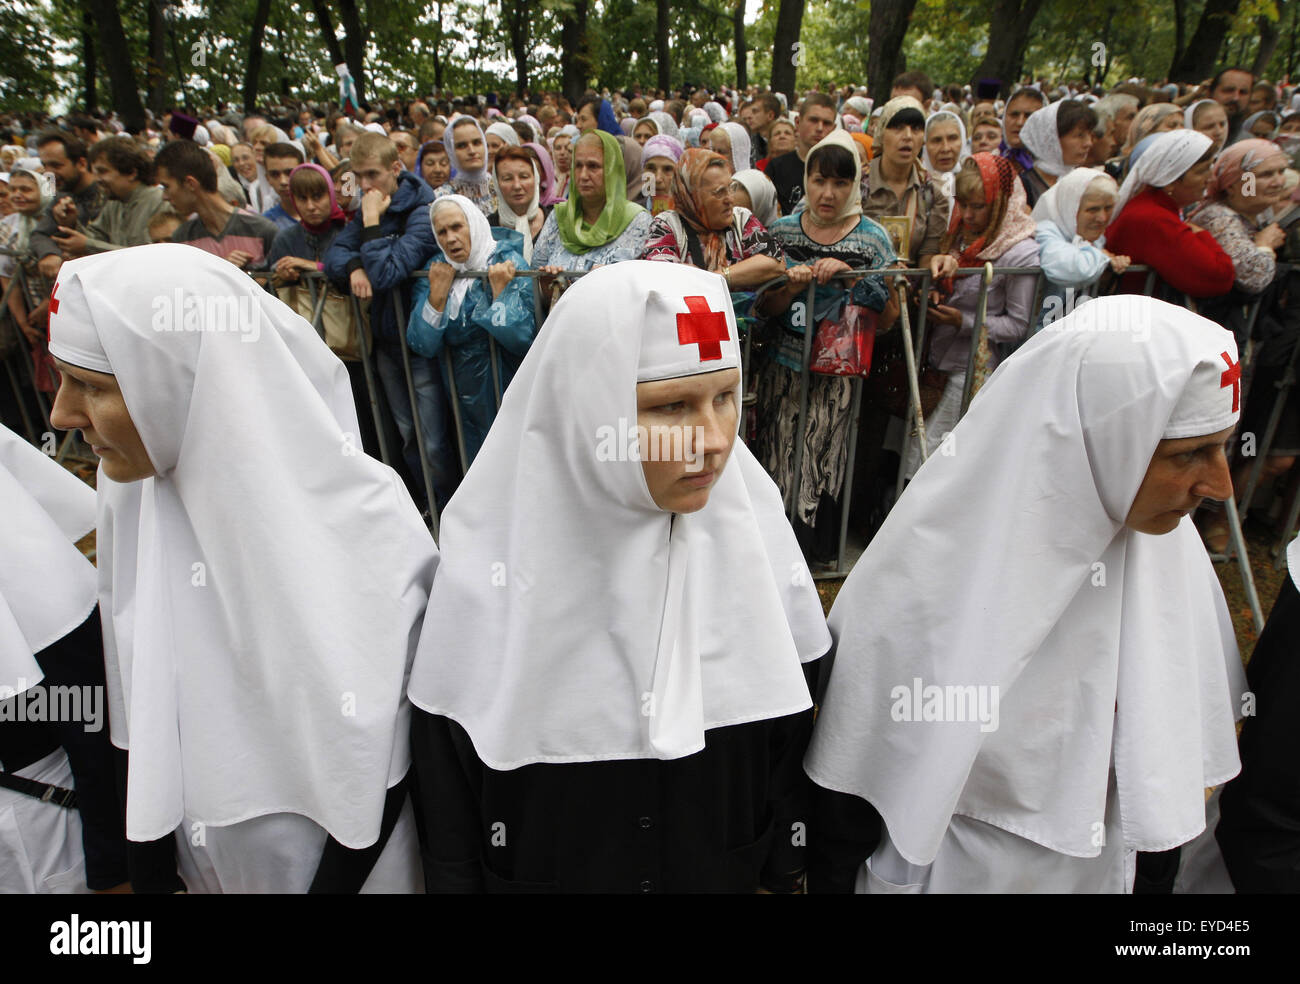 Kiev, Ukraine. 27th July, 2015. Ukrainian nuns and believers wait for a prayer service marking the 1000th anniversary of the Repose of Vladimir the Great at St. Vladimirs Hill in Kiev, Ukraine, 27 July 2015. The Grand Prince of Kiev, Vladimir the Great, also known as St. Vladimir, Vladimir the Baptizer of Rus and Vladimir the Red Sun, was the first Christian ruler in the Kievan Rus who christianized the region. Orthodox believers will mark the 1027th anniversary of Kievan Rus Christianization on 28 July. © Serg Glovny/ZUMA Wire/Alamy Live News Stock Photo